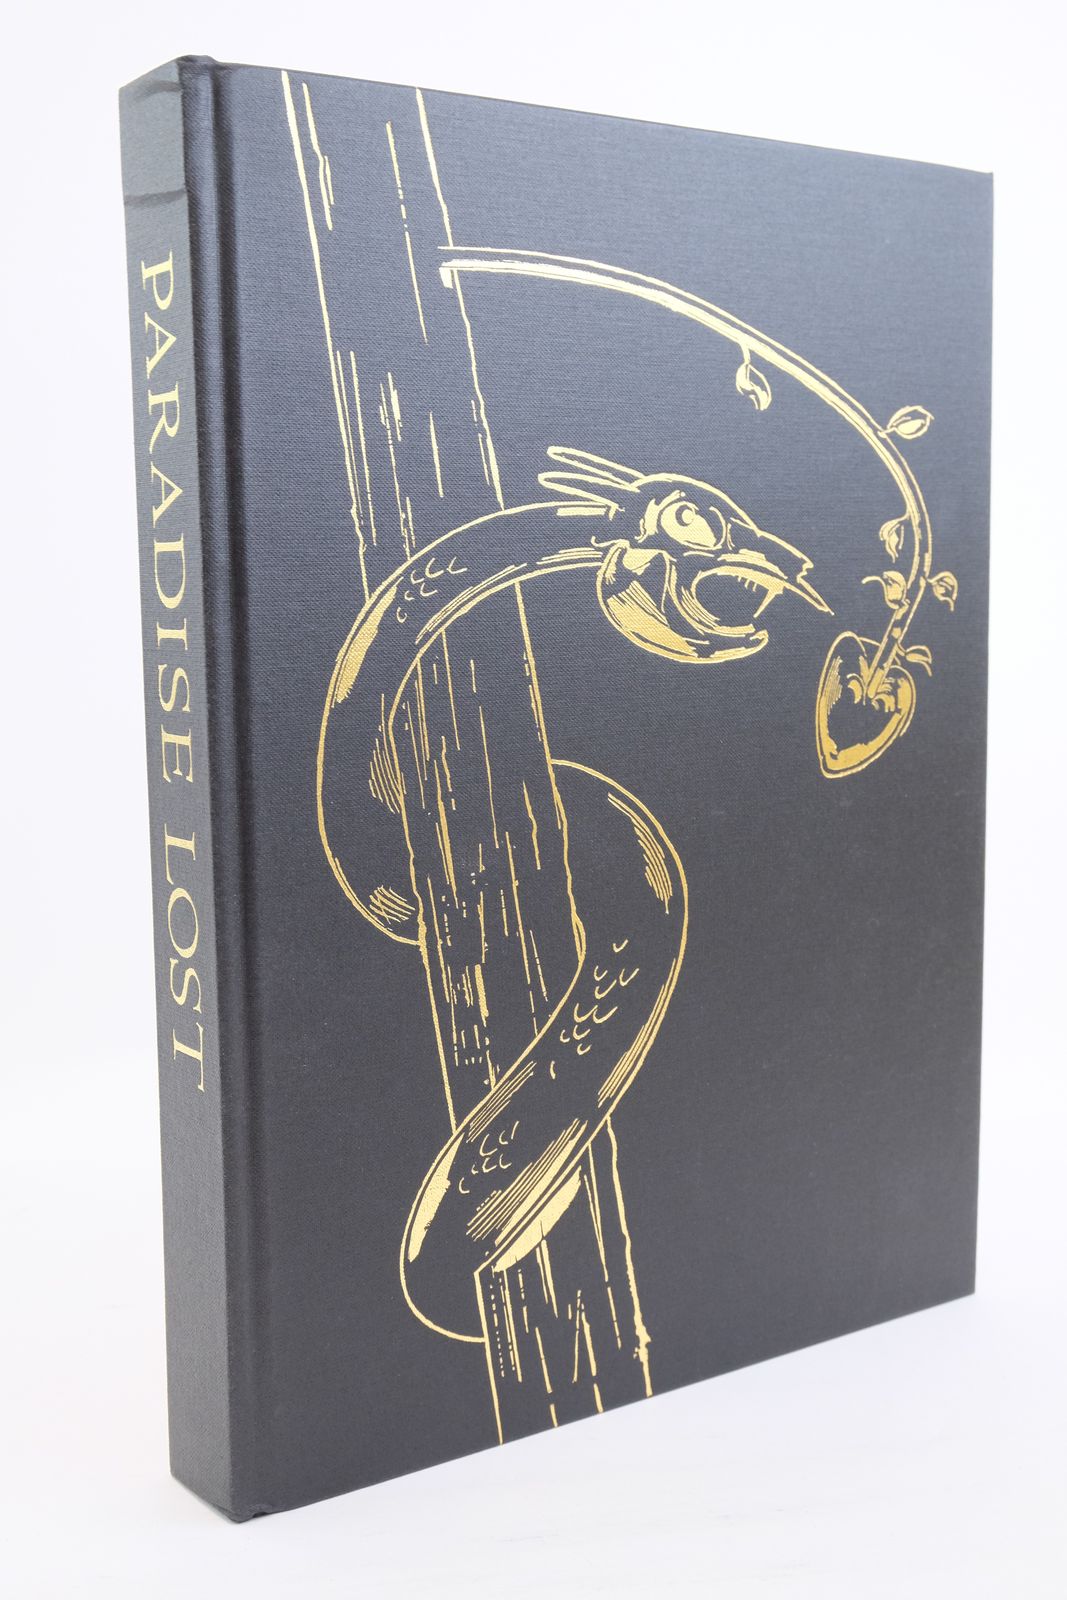 Photo of PARADISE LOST written by Milton, John Wain, John illustrated by Pollock, Ian published by Folio Society (STOCK CODE: 1320969)  for sale by Stella & Rose's Books